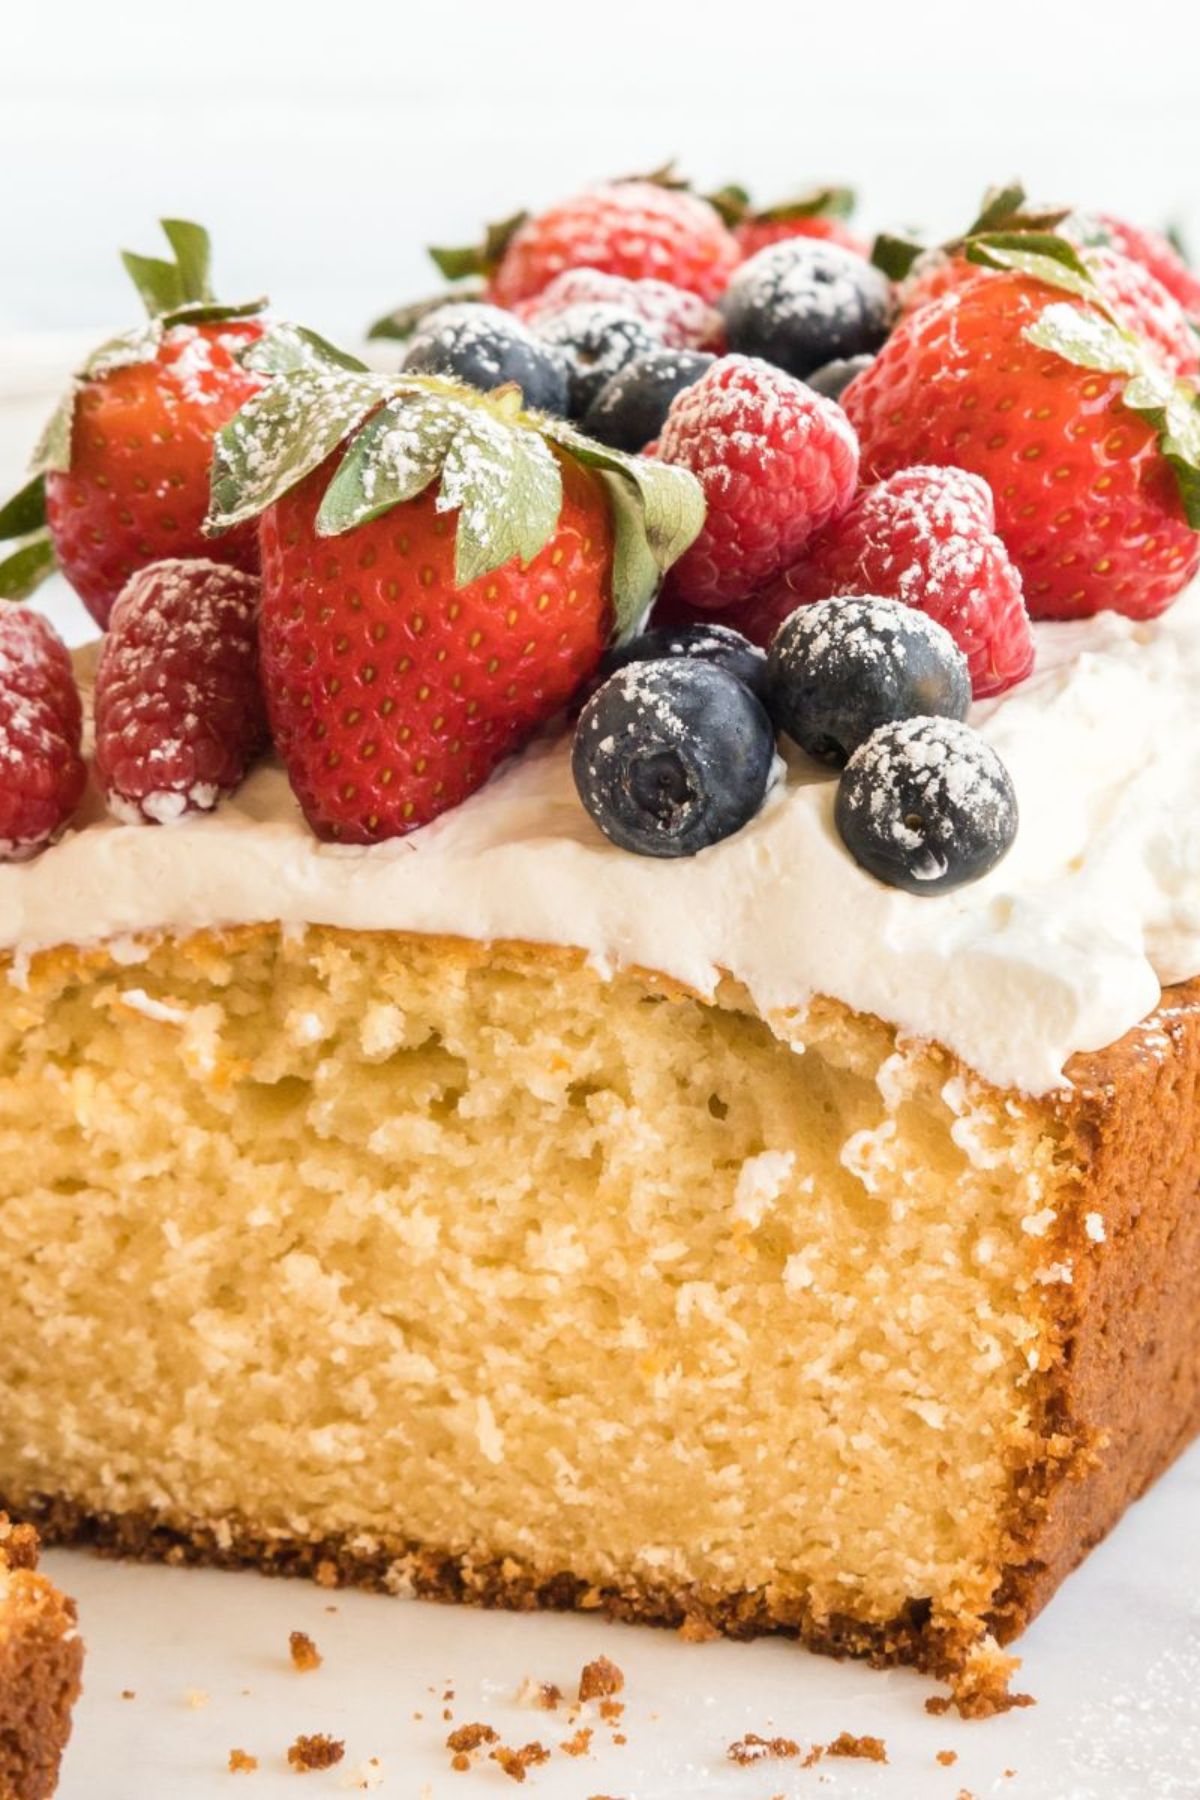 Whipped cream pound cake with berries on top.